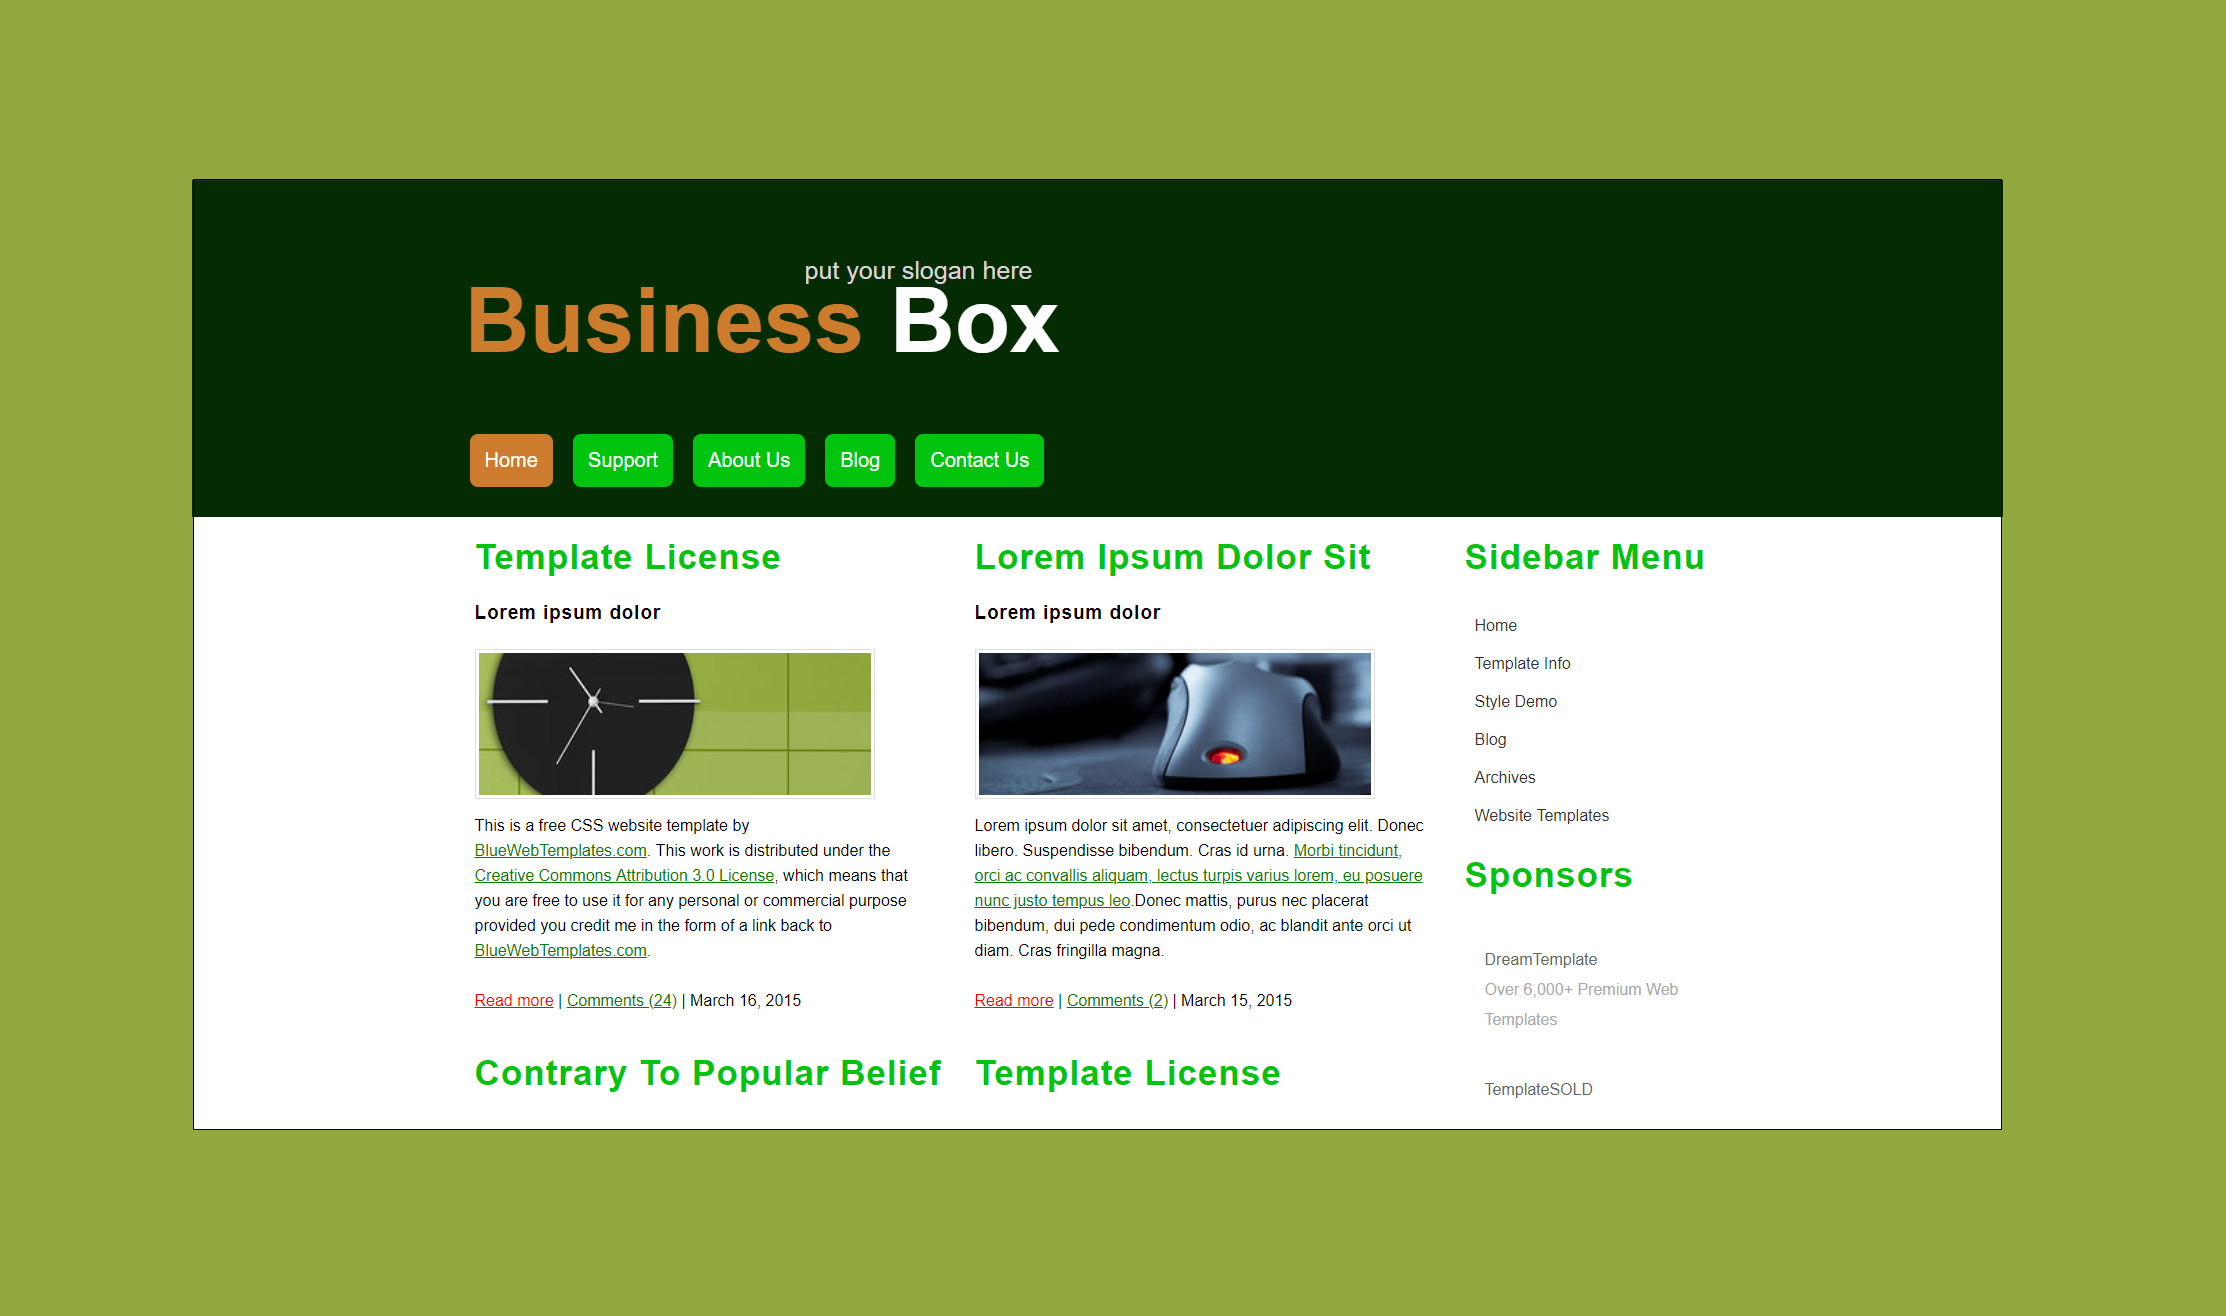 Business Box Project